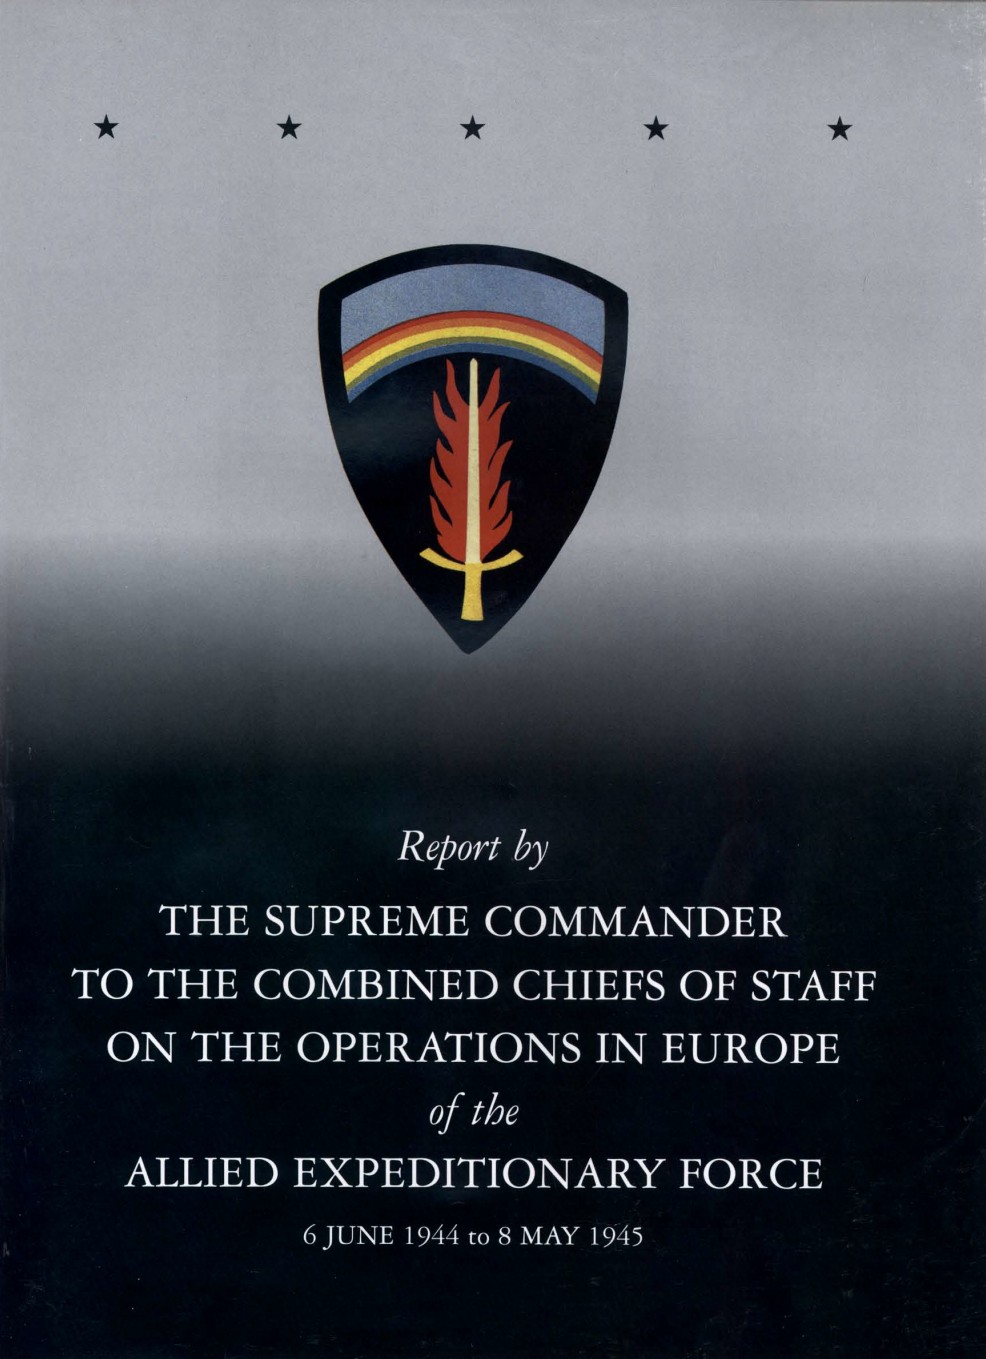 01 - USA2 - Dwight D. Eisenhower - Report by the Supreme Commander...d Expeditionary Force, 6 June 1944 to 8 May 1945 1994.jpg